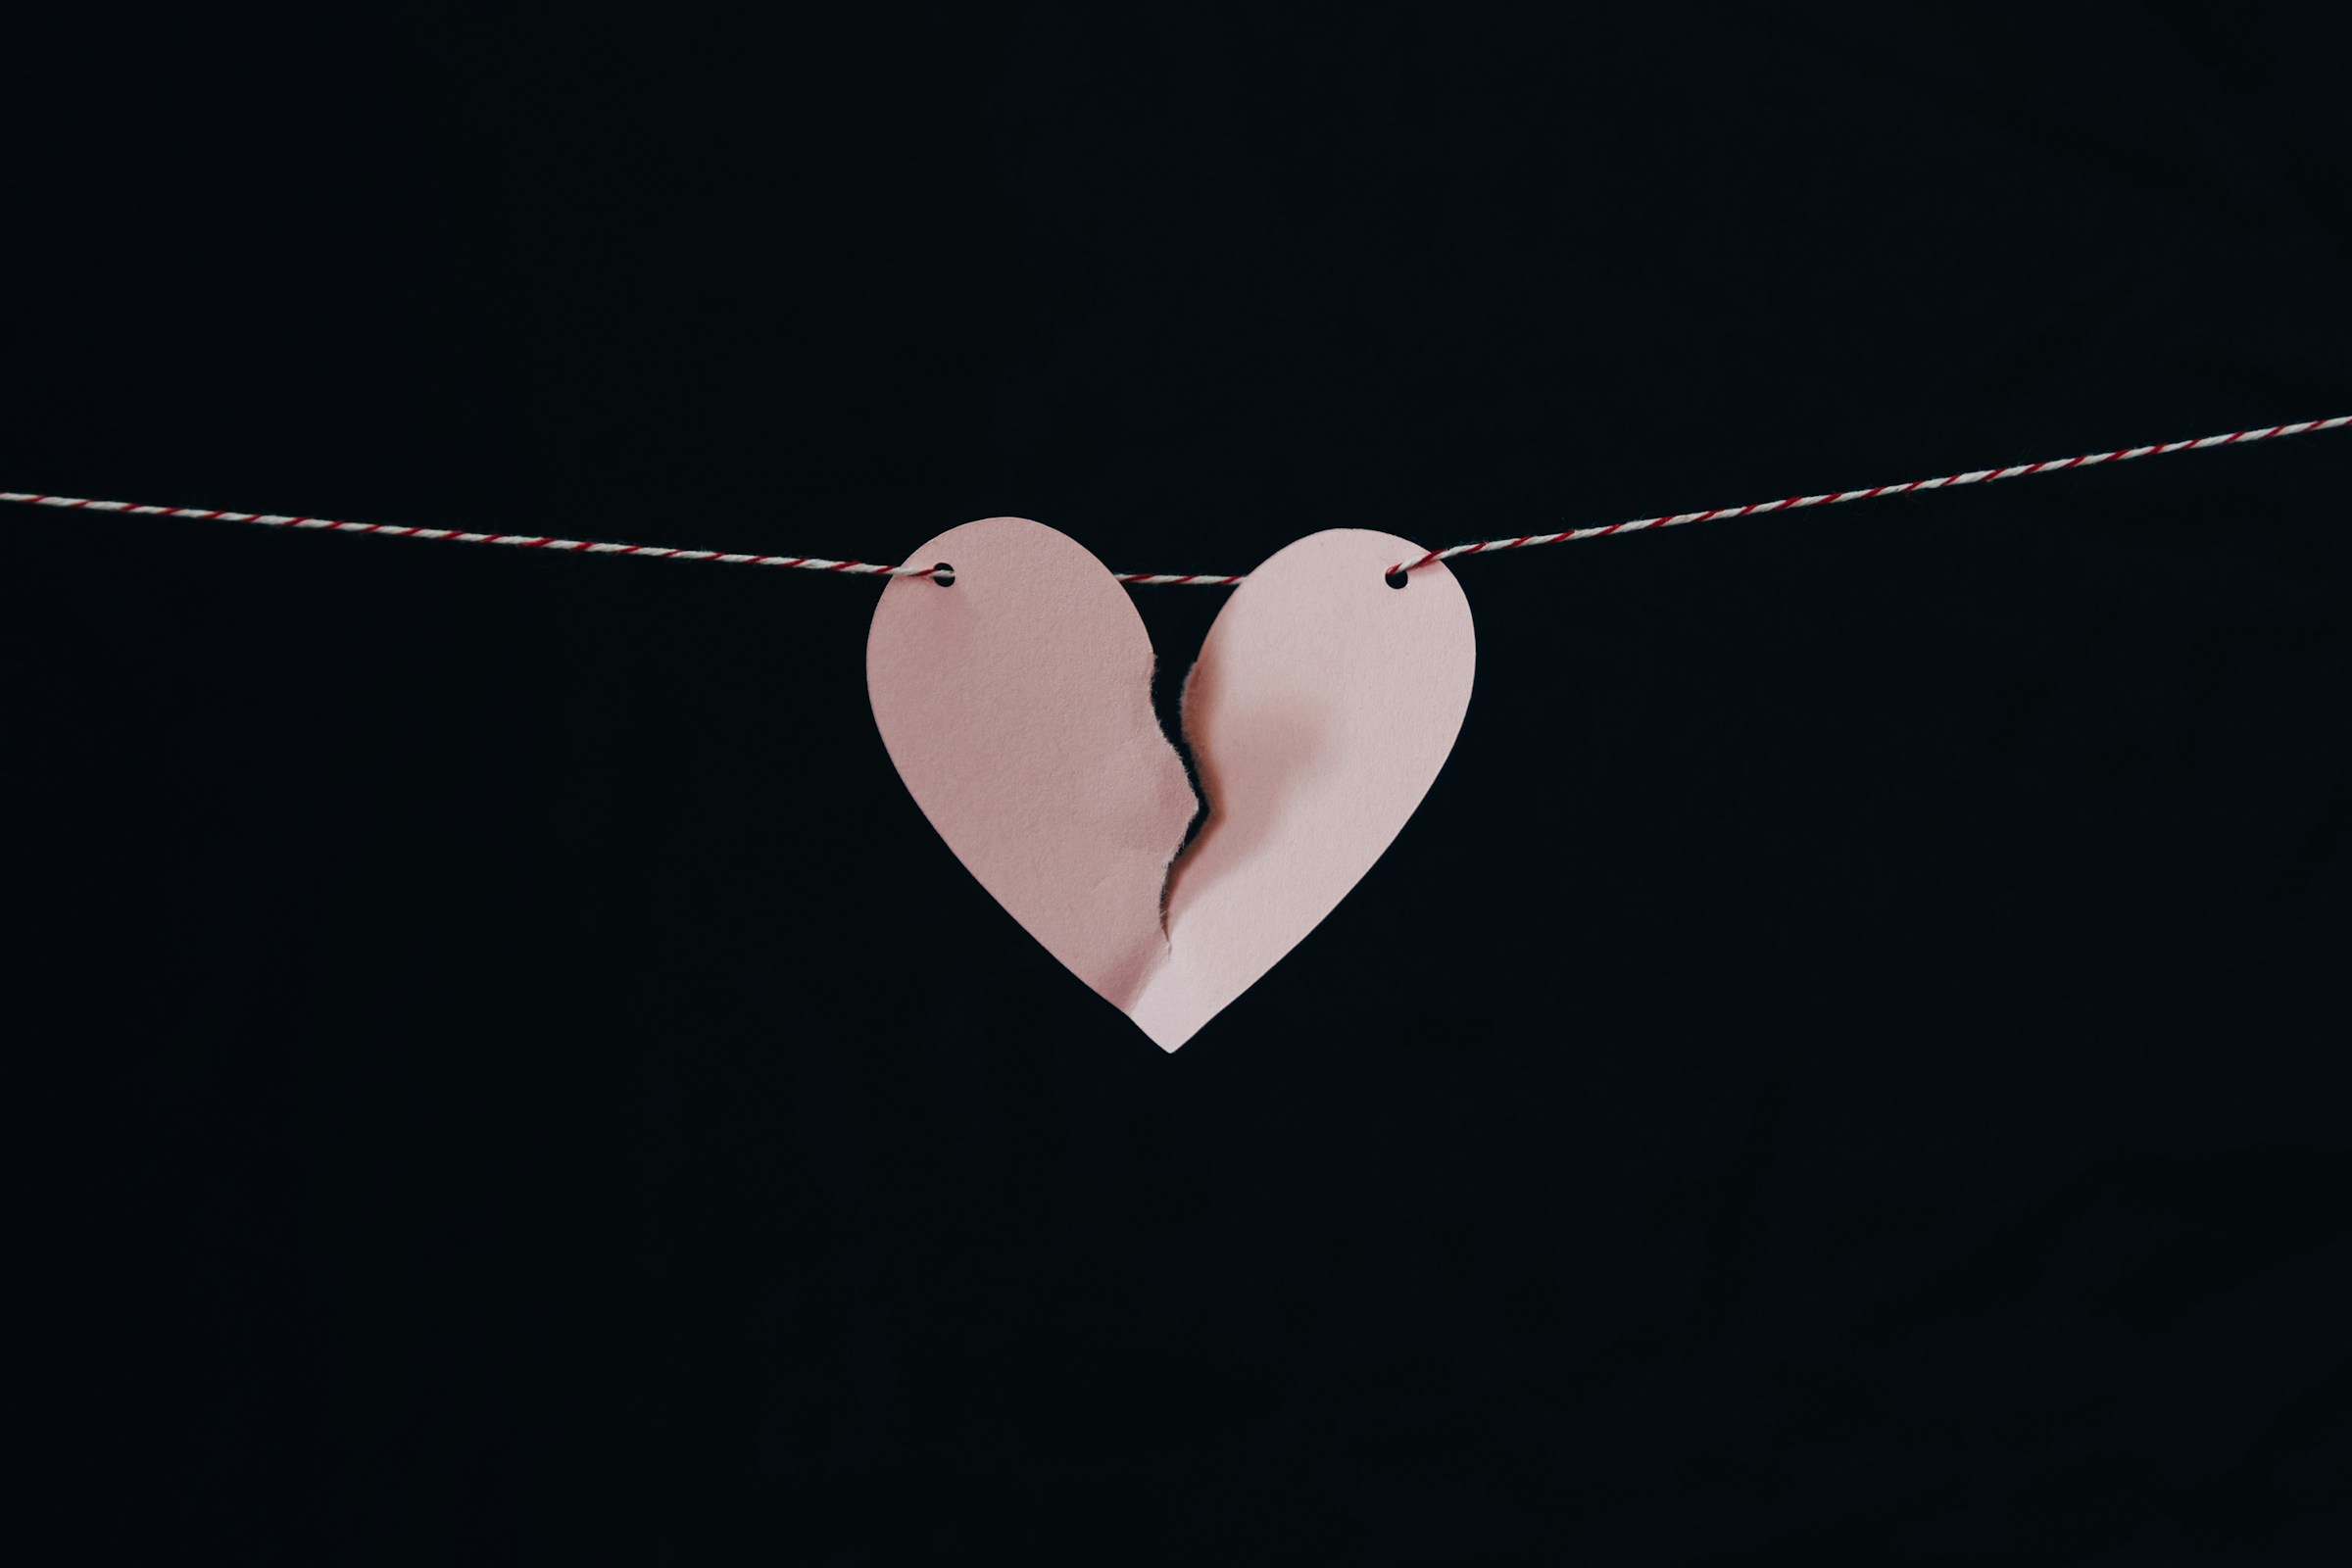 A broken paper heart hanging on a wire | Source: Unsplash